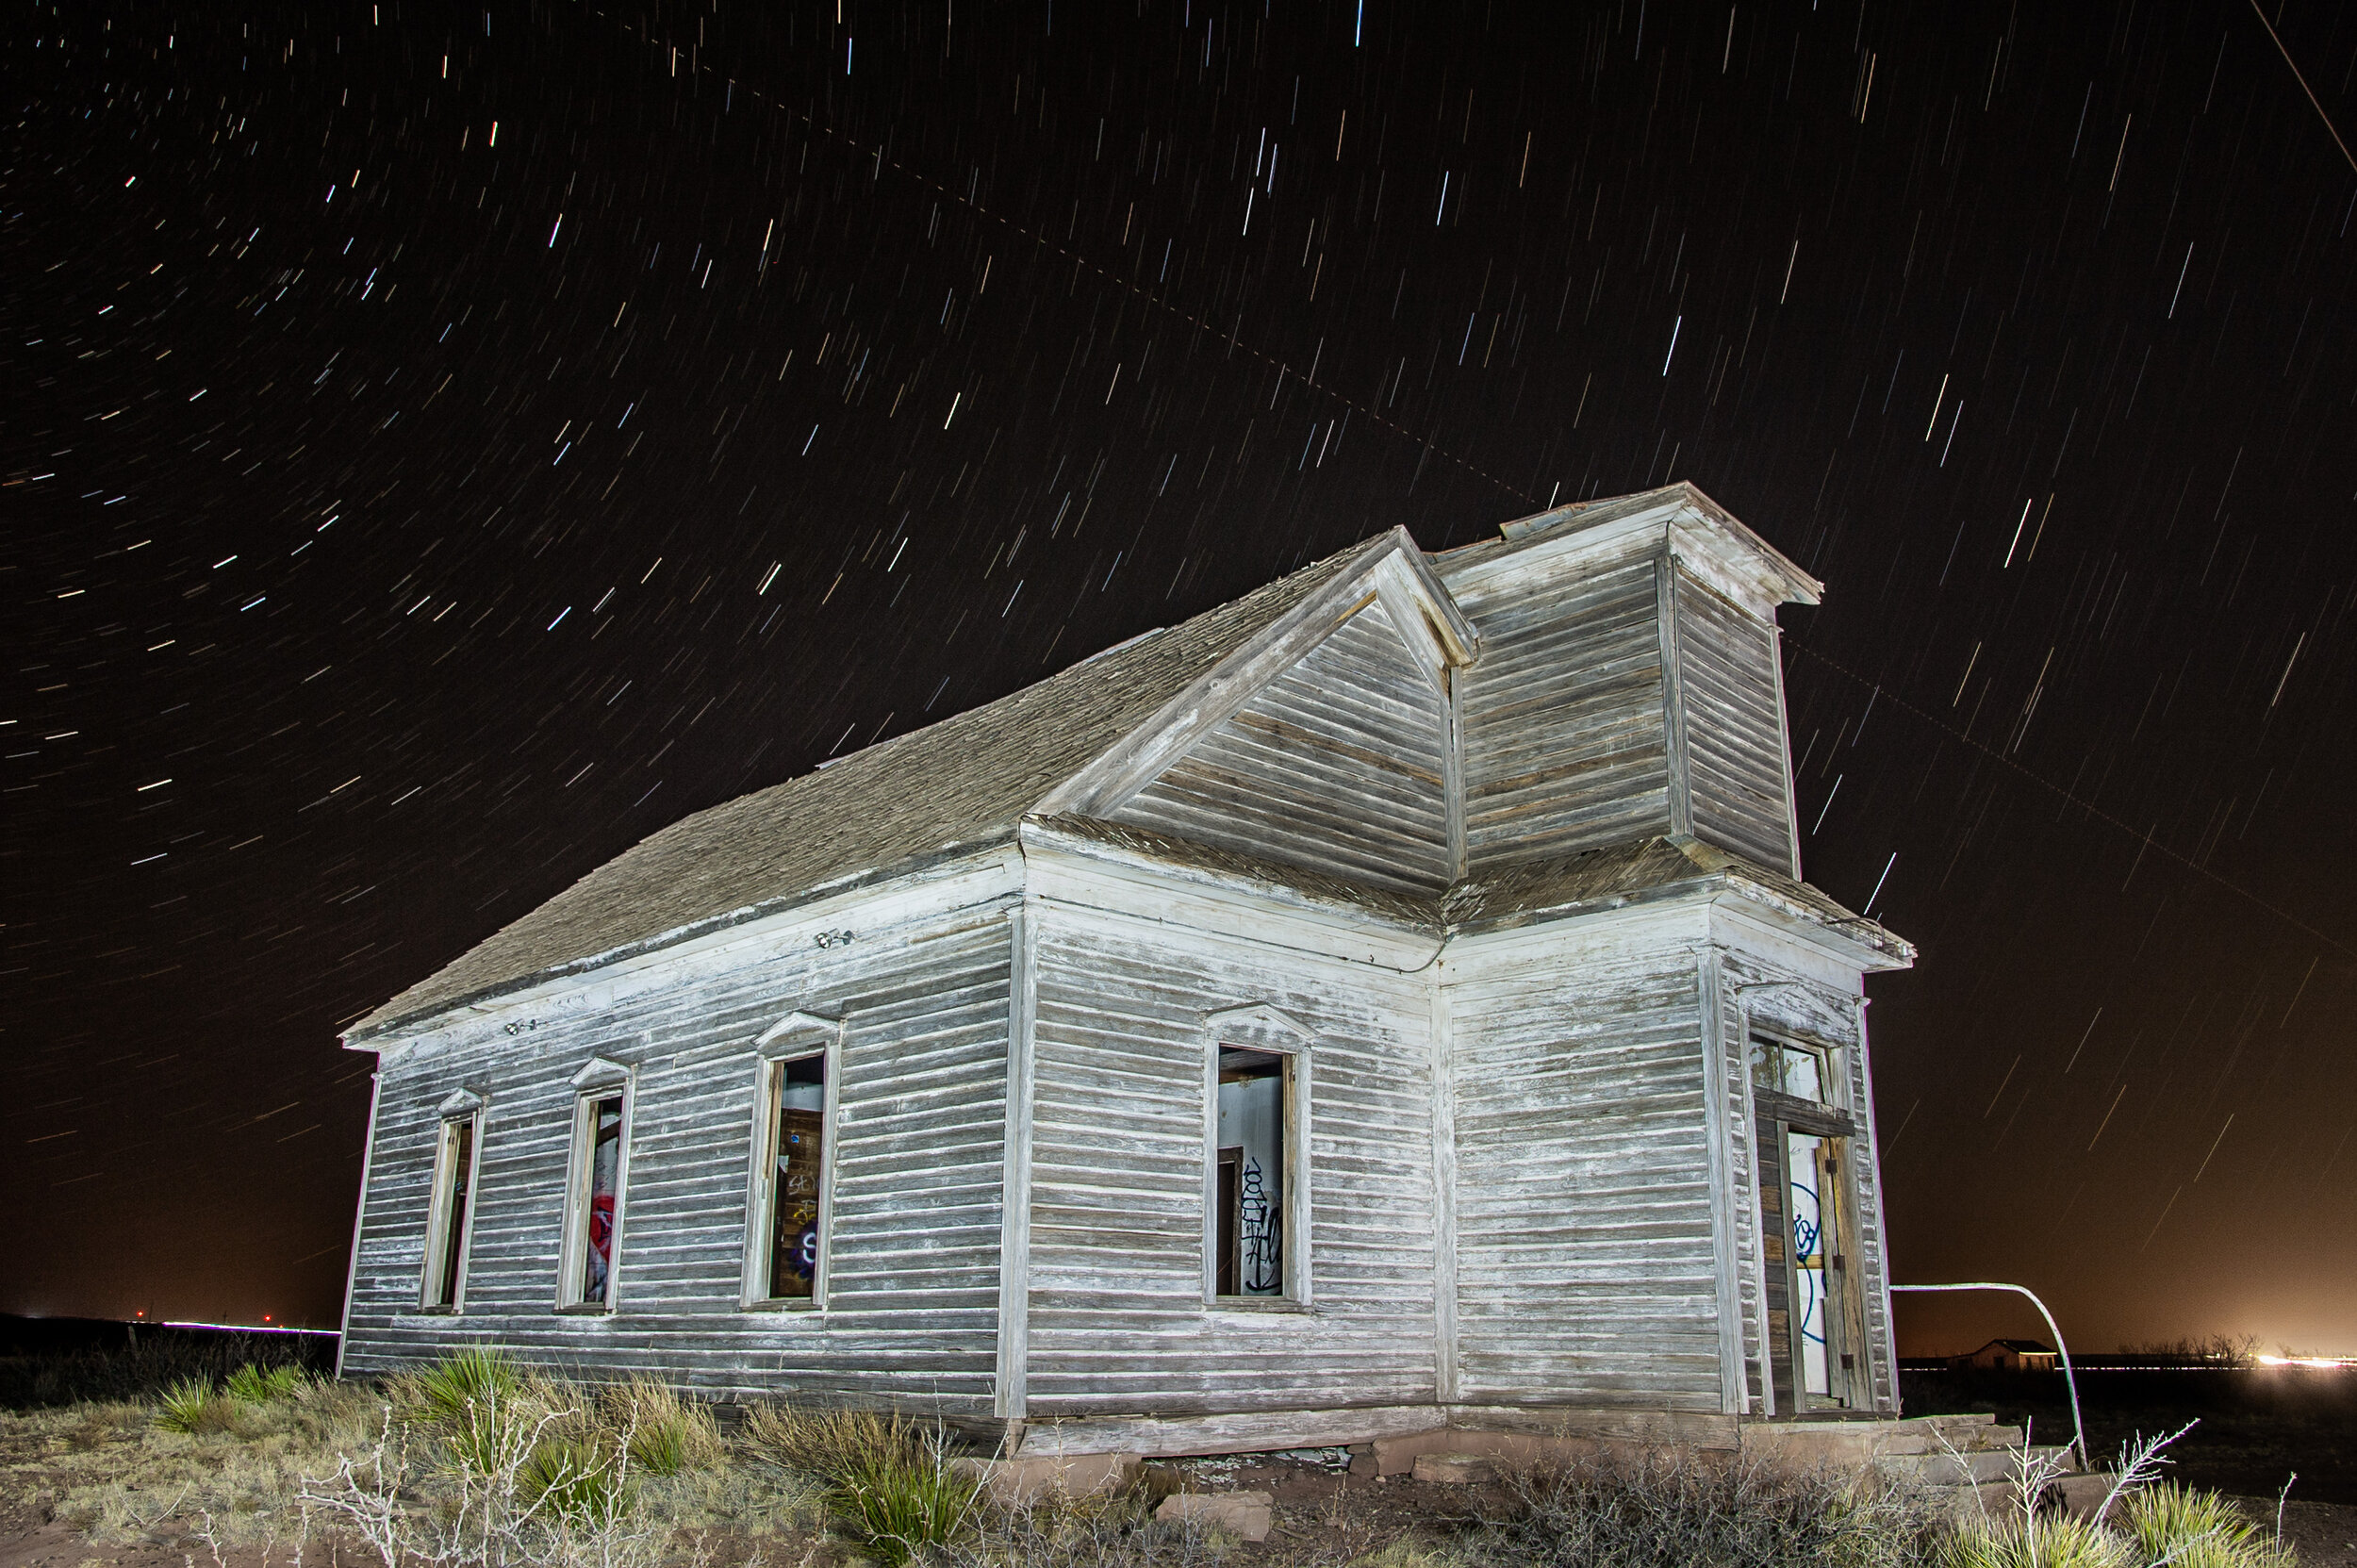  The abandoned Taiban Presbyterian Church sits under the stars on Saturday, April 10, 2021, in Taiban, N.M. The city was founded in 1906 by railroad workers and homesteaders, where a Presbyterian church was built in 1908. Taiban is most commonly know